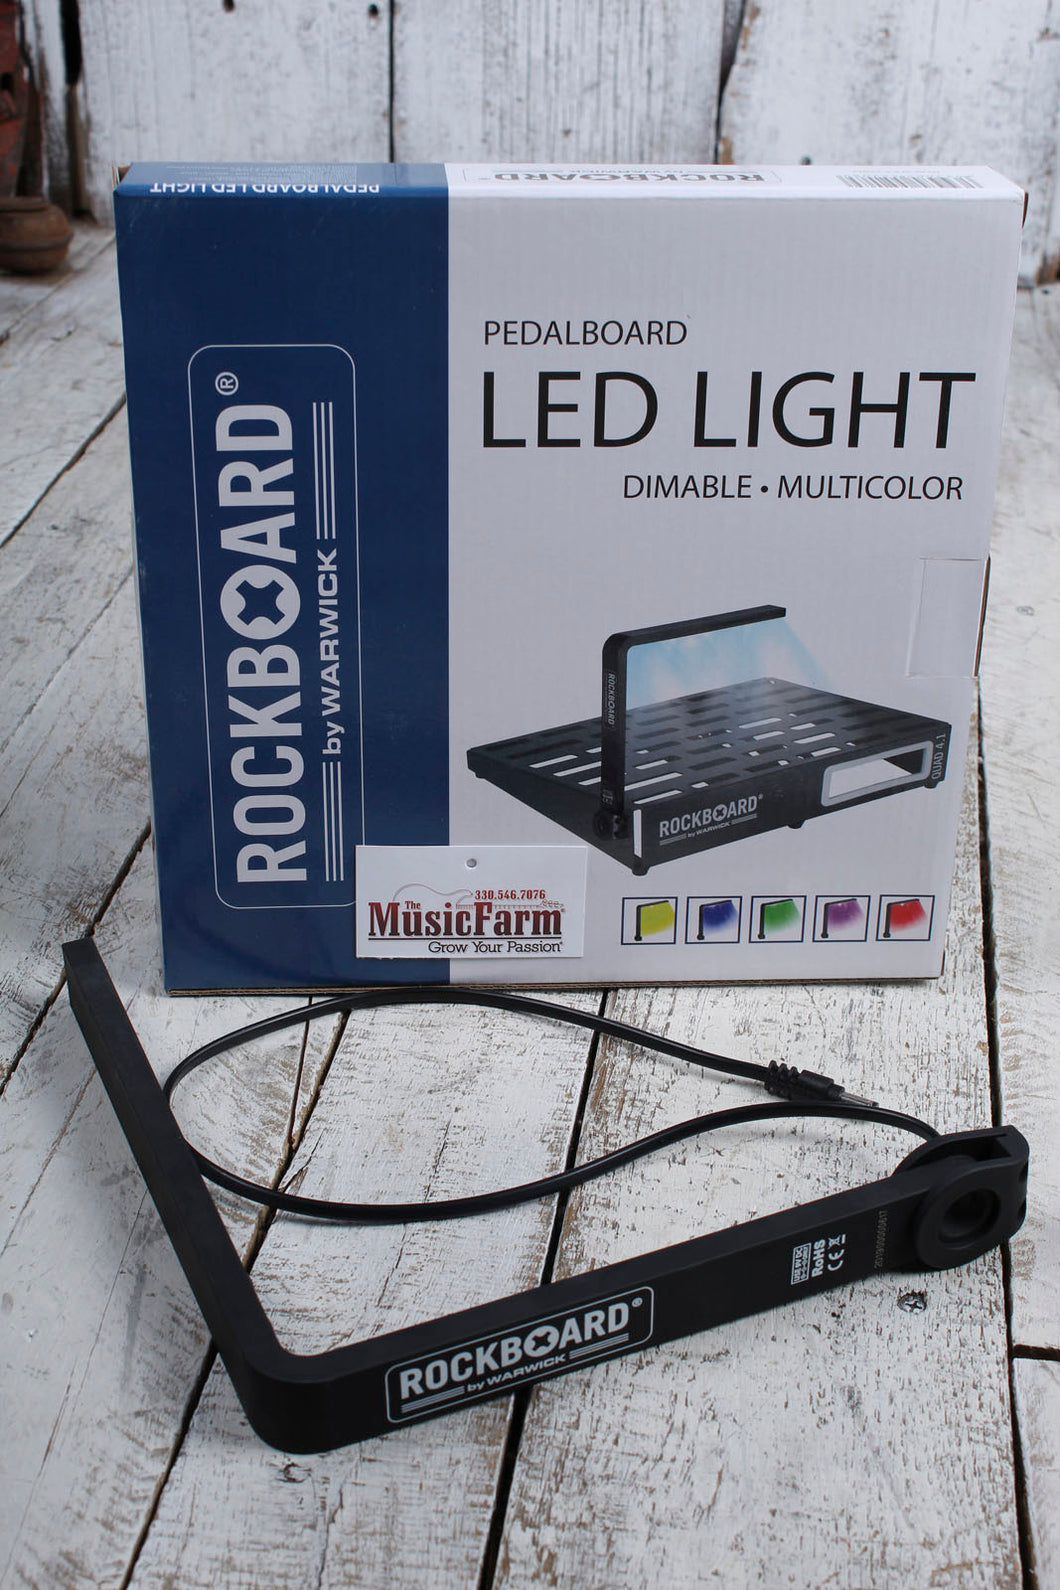 RockBoard RBO B LED LIGHT LED Light for Pedal Boards with 6 Selectable Colors